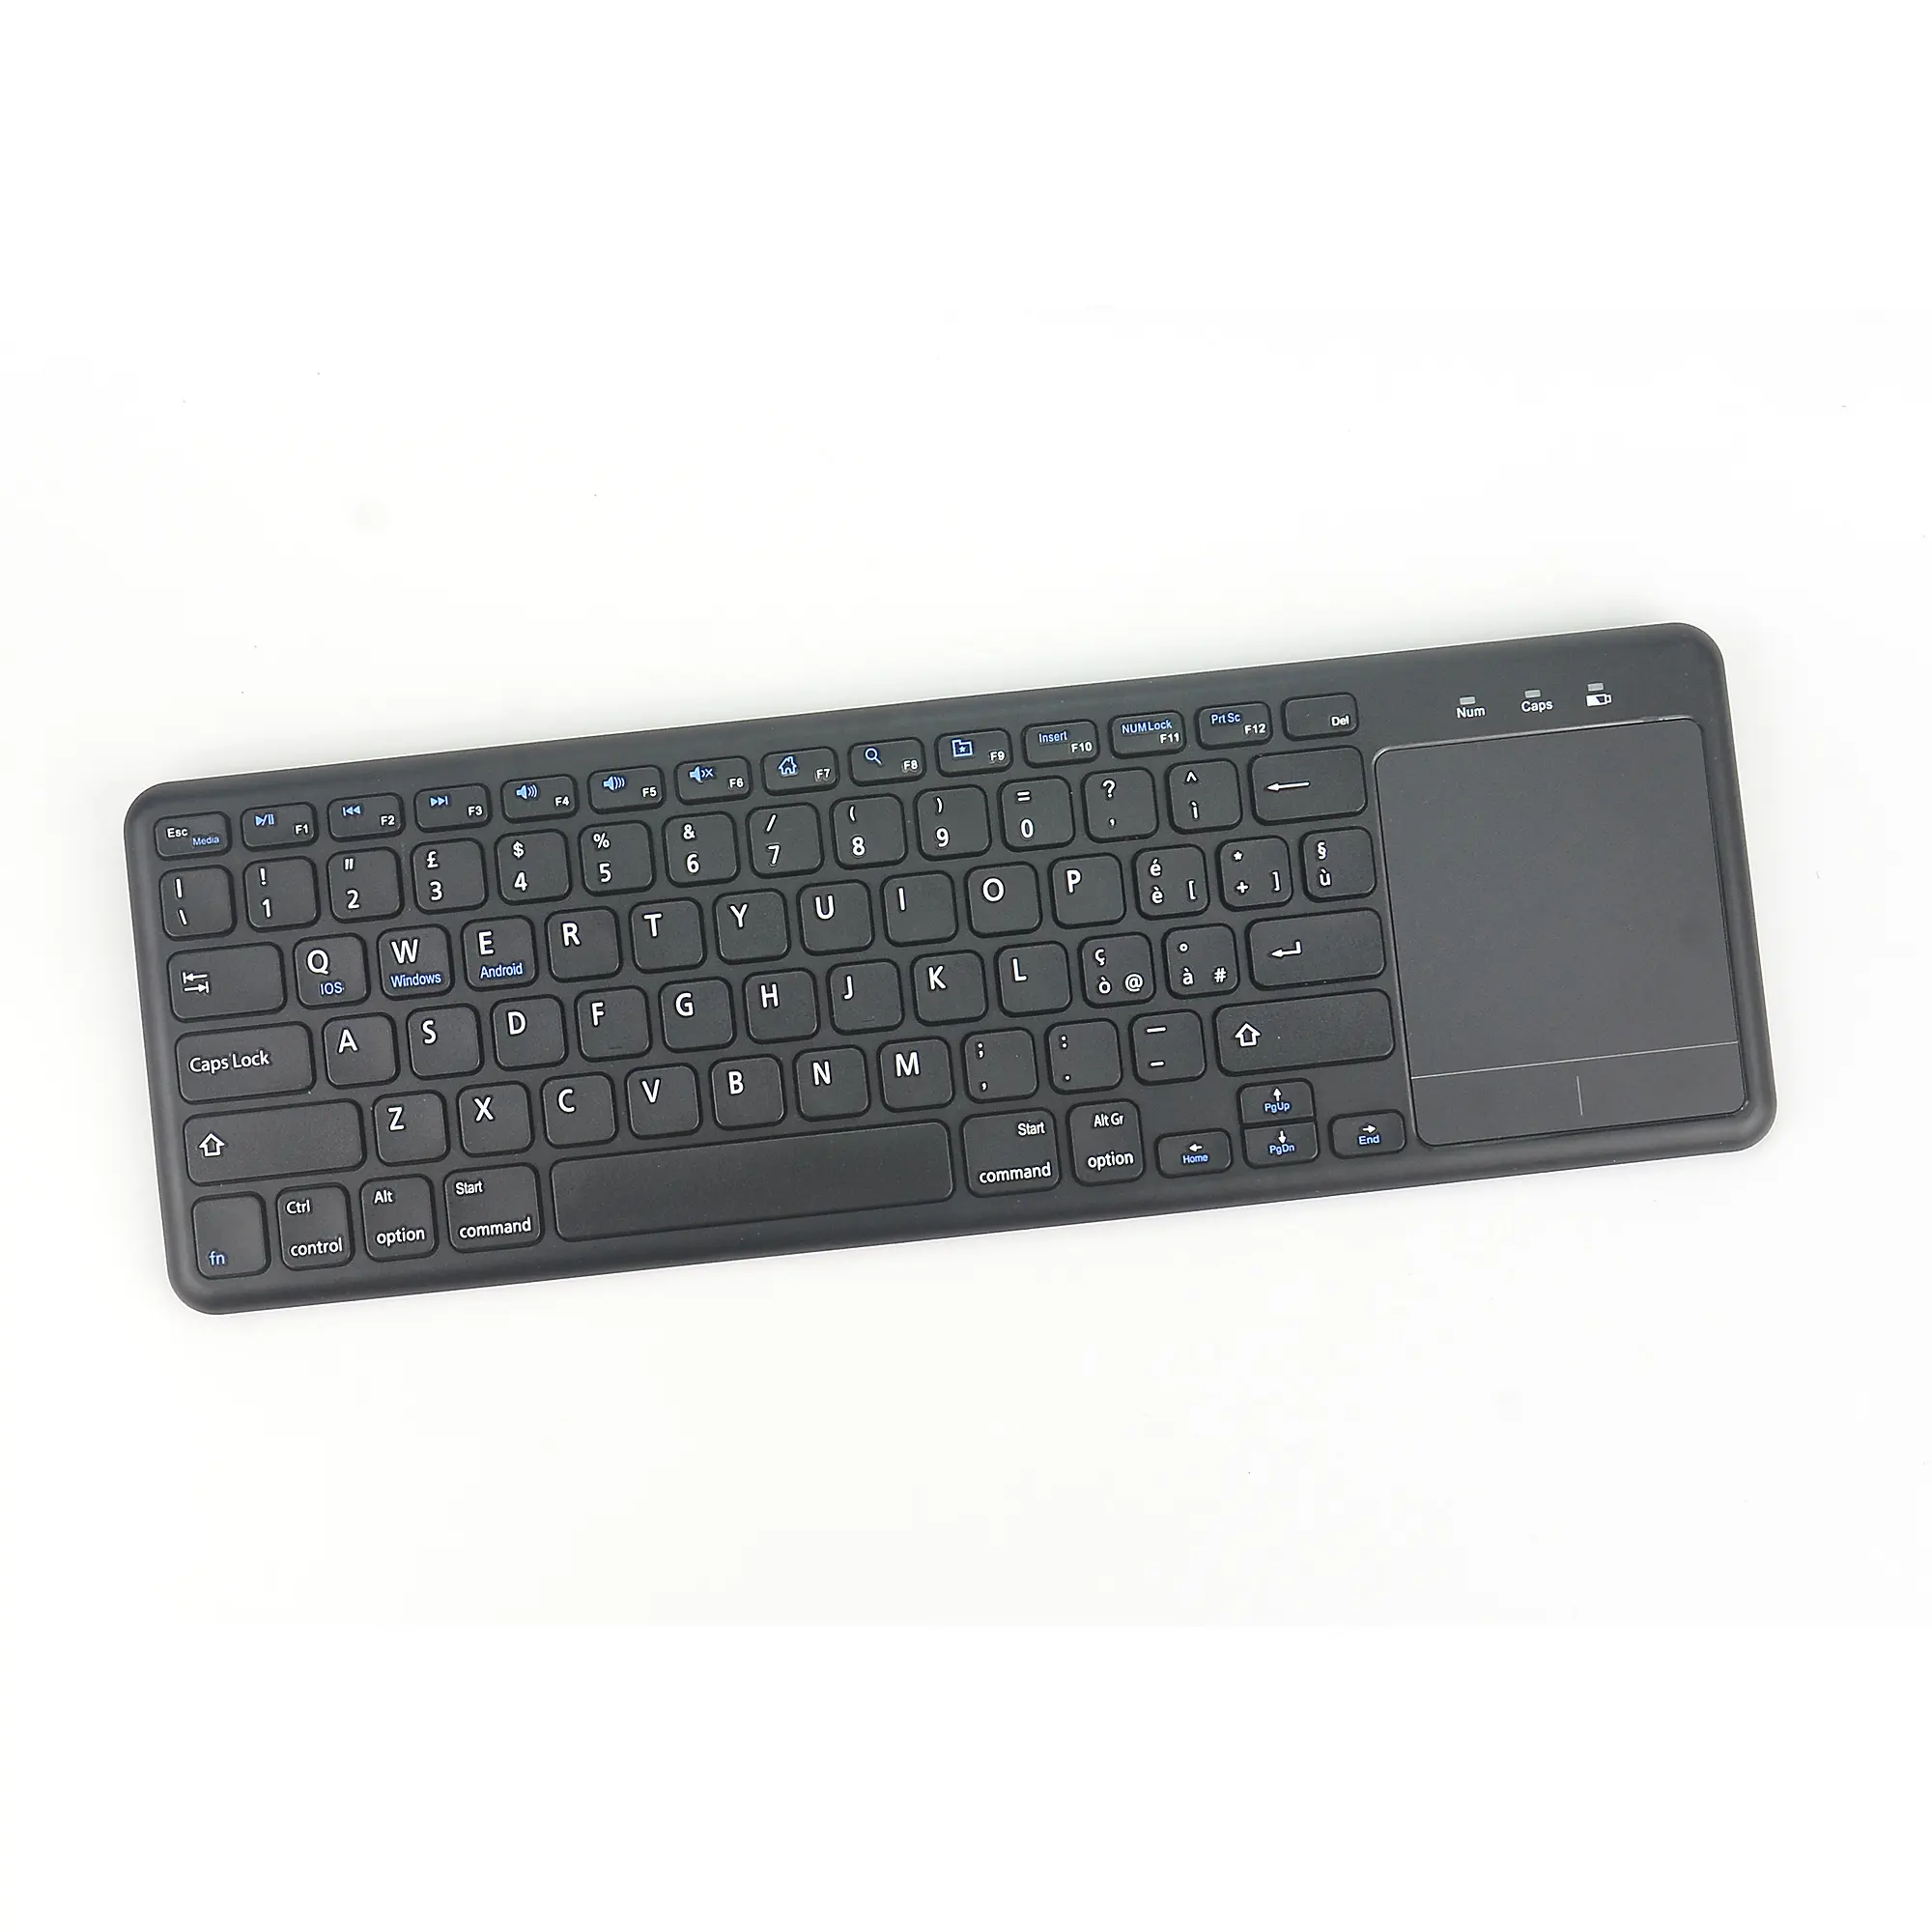 OEM wireless keyboard for tcl android smart tv keyboard with touchpad